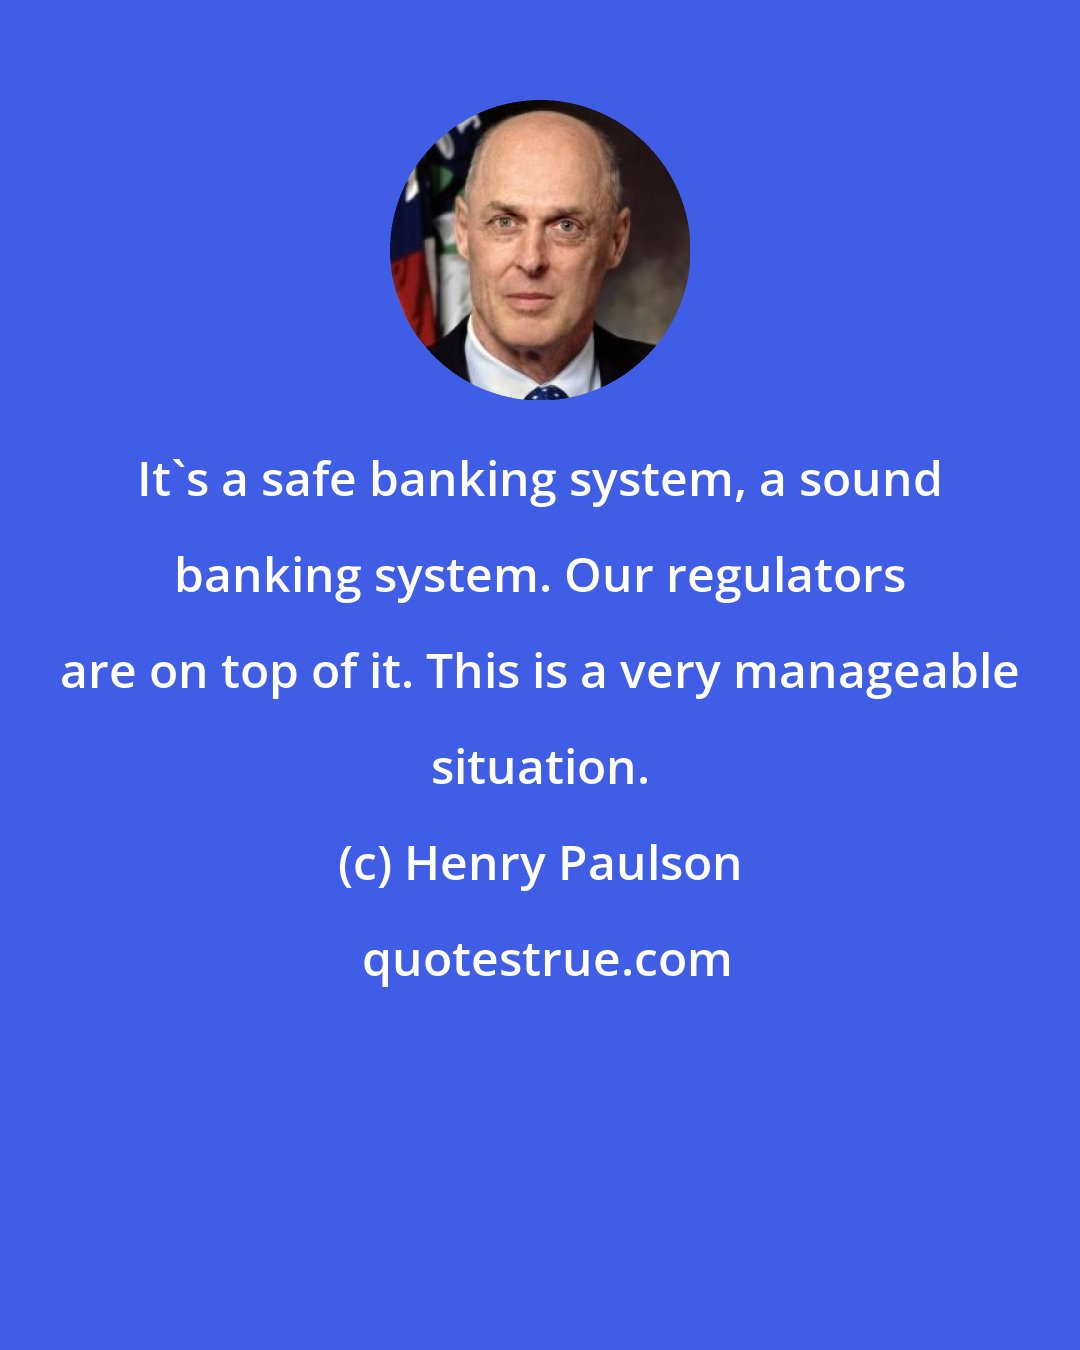 Henry Paulson: It's a safe banking system, a sound banking system. Our regulators are on top of it. This is a very manageable situation.